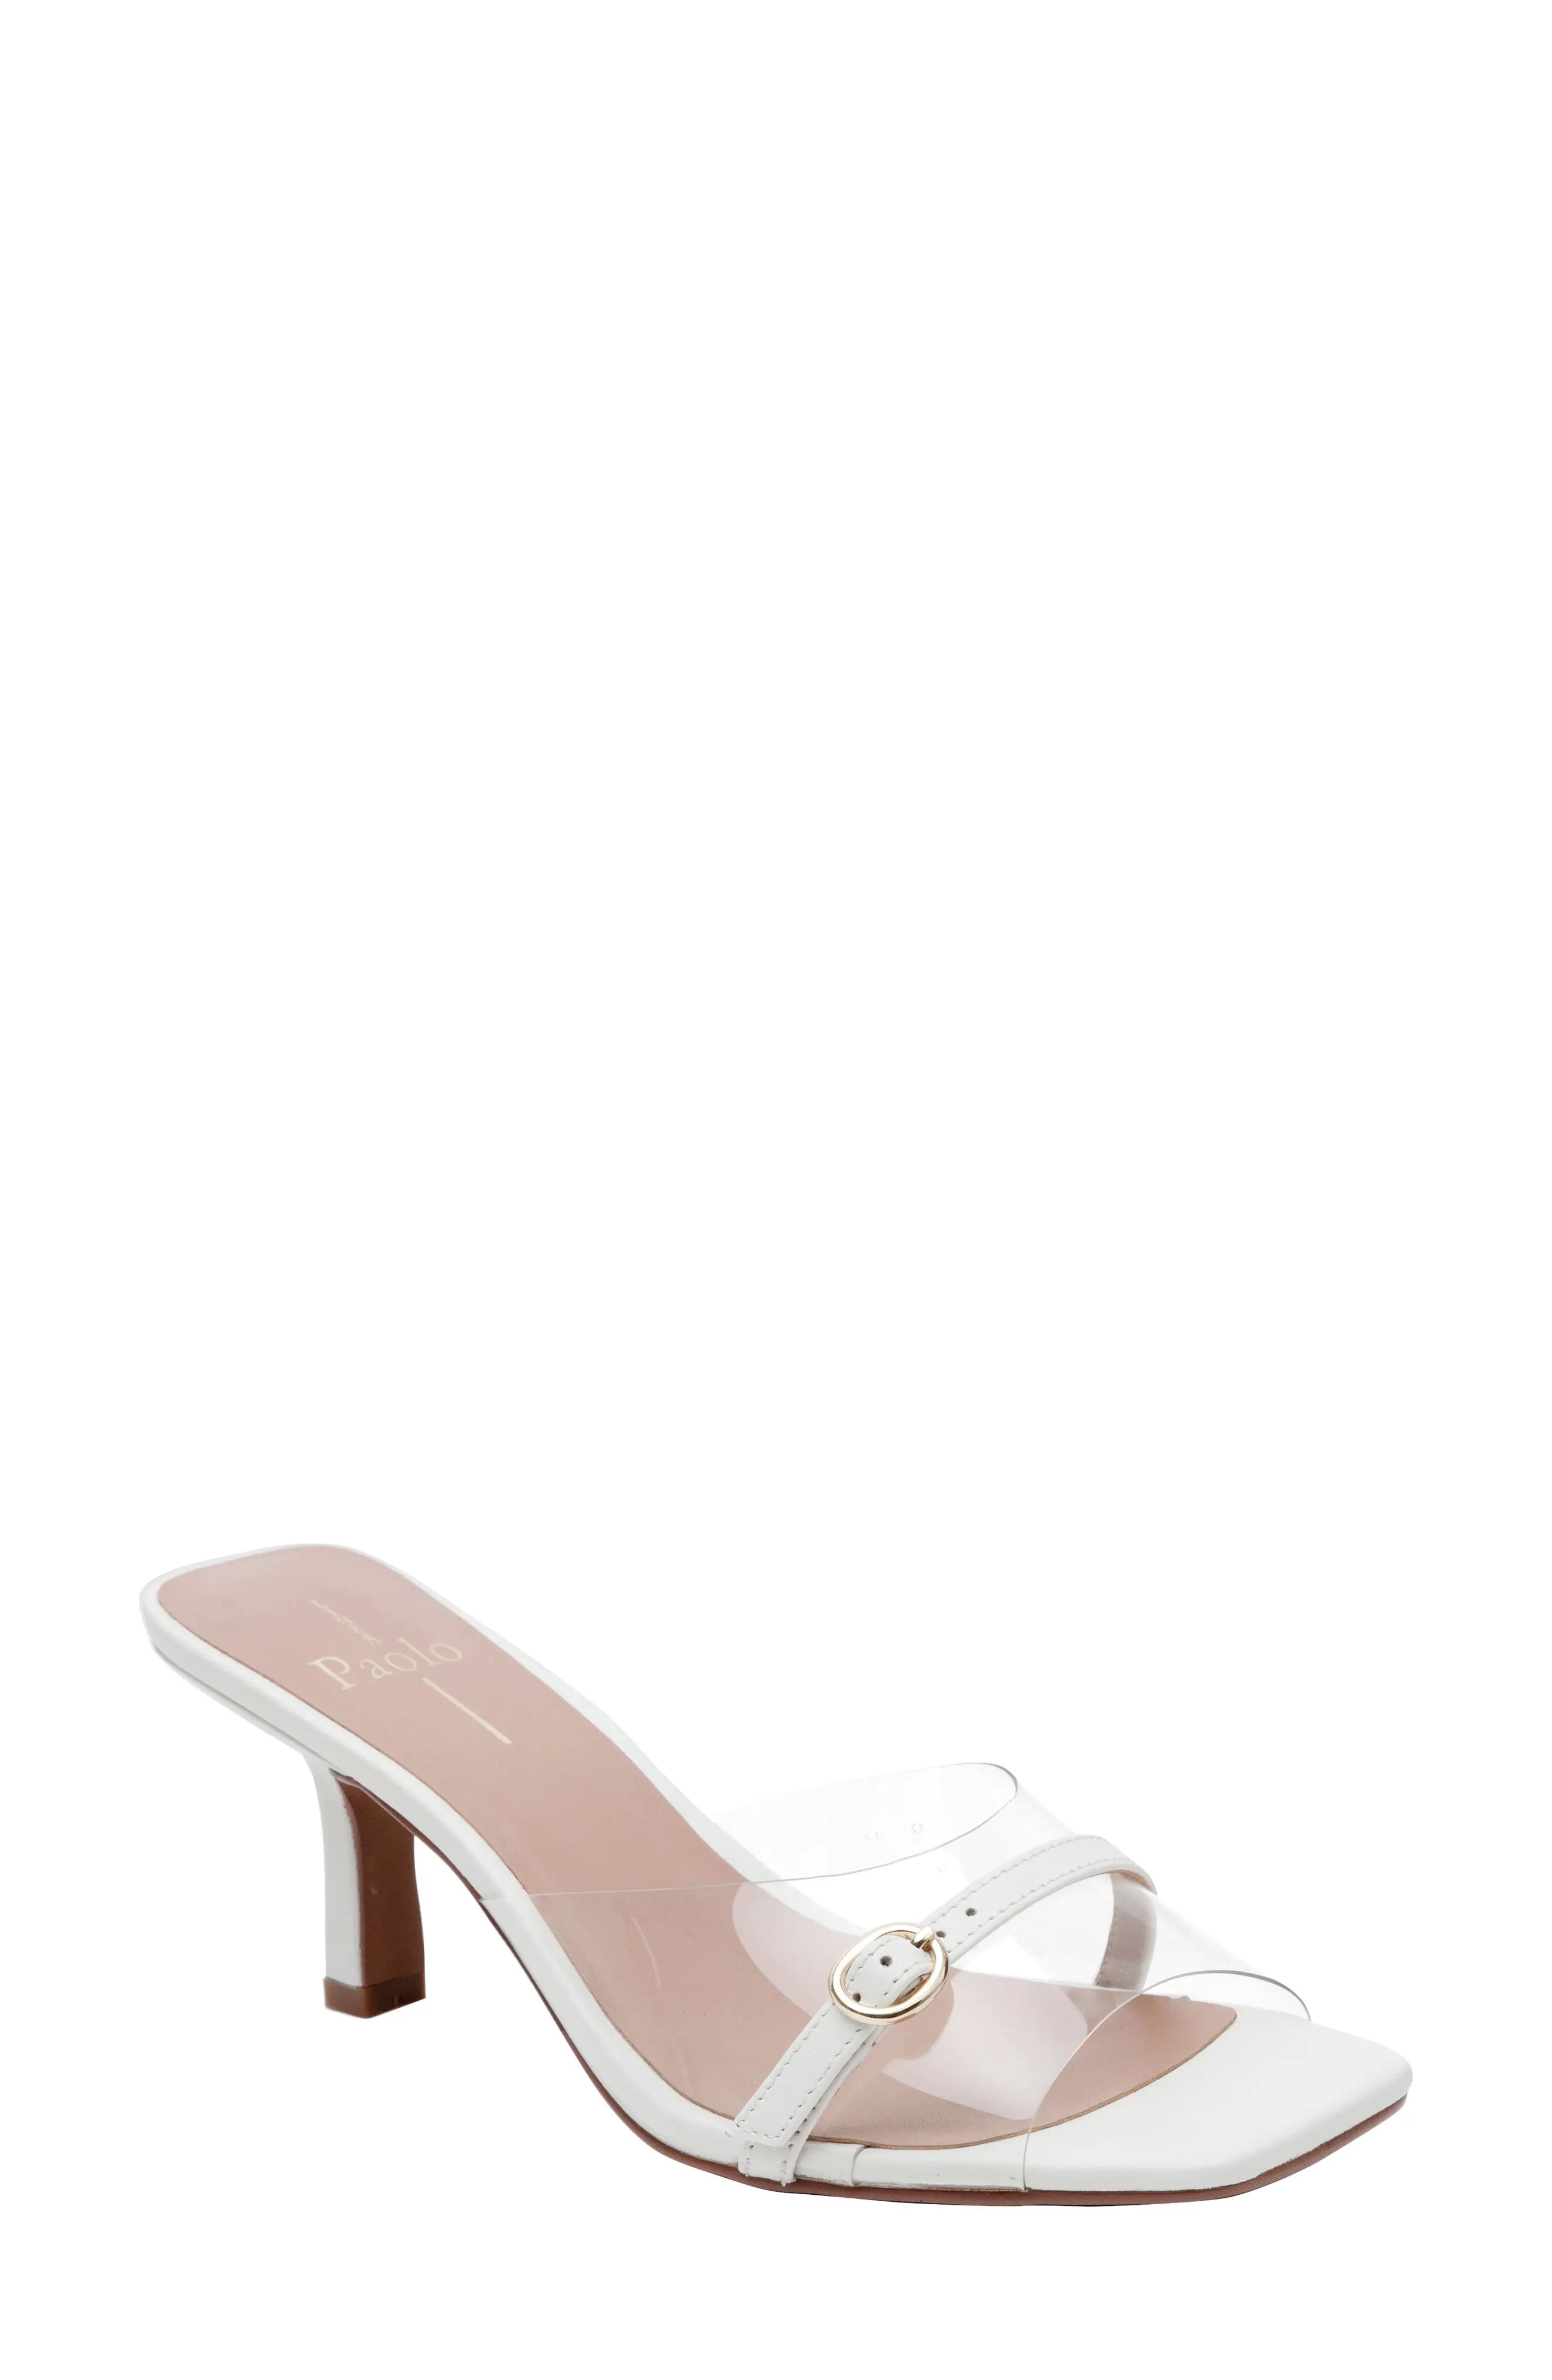 Linea Paolo Gillian Sandal in Clear/Eggshell at Nordstrom, Size 9 | Nordstrom